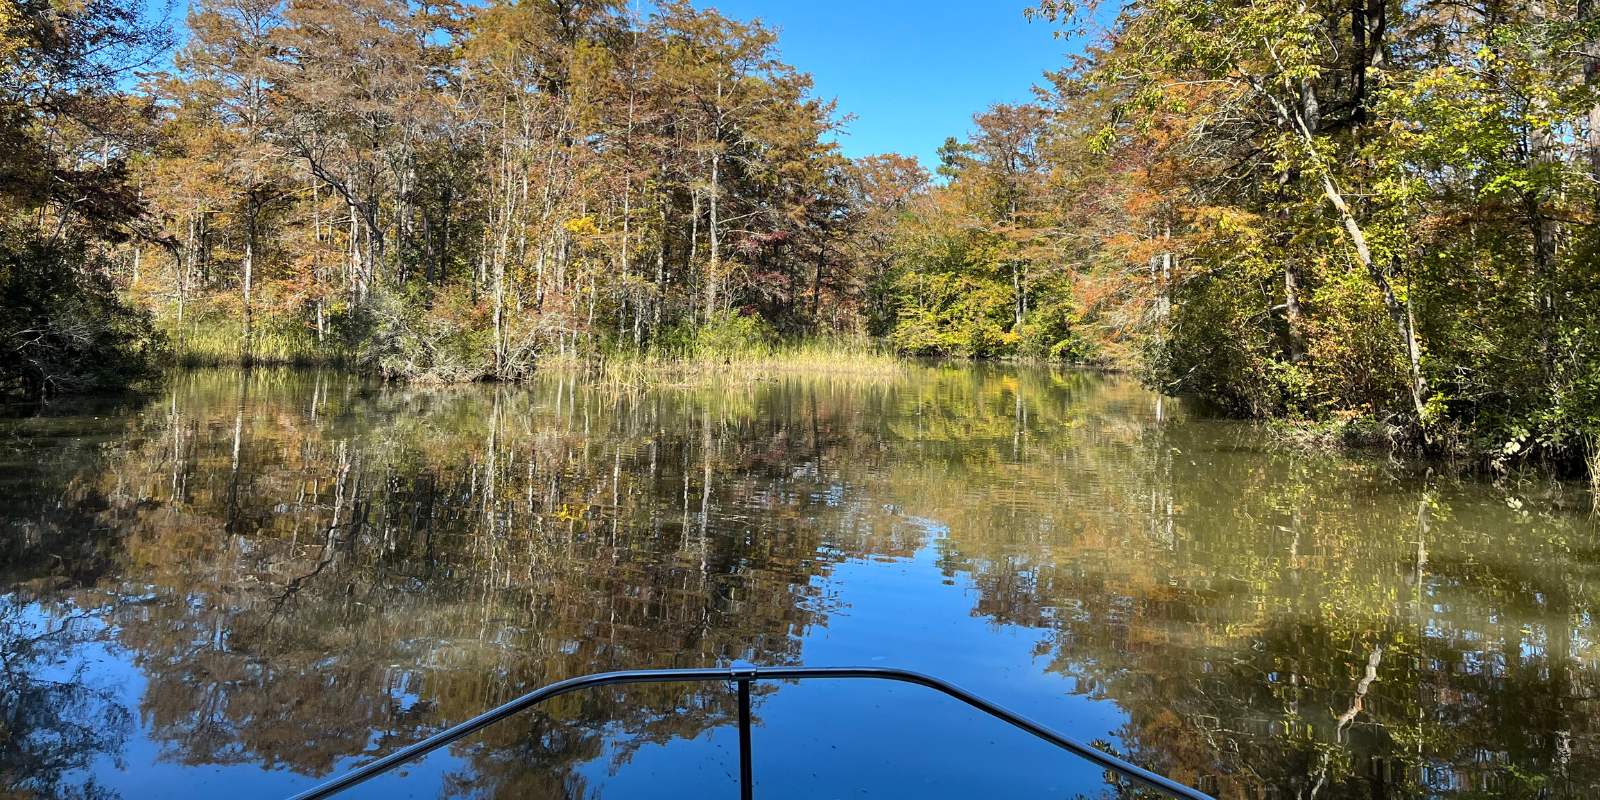 An image taken from a boat of the upper portion of Gray's creek with brilliant fall foliage